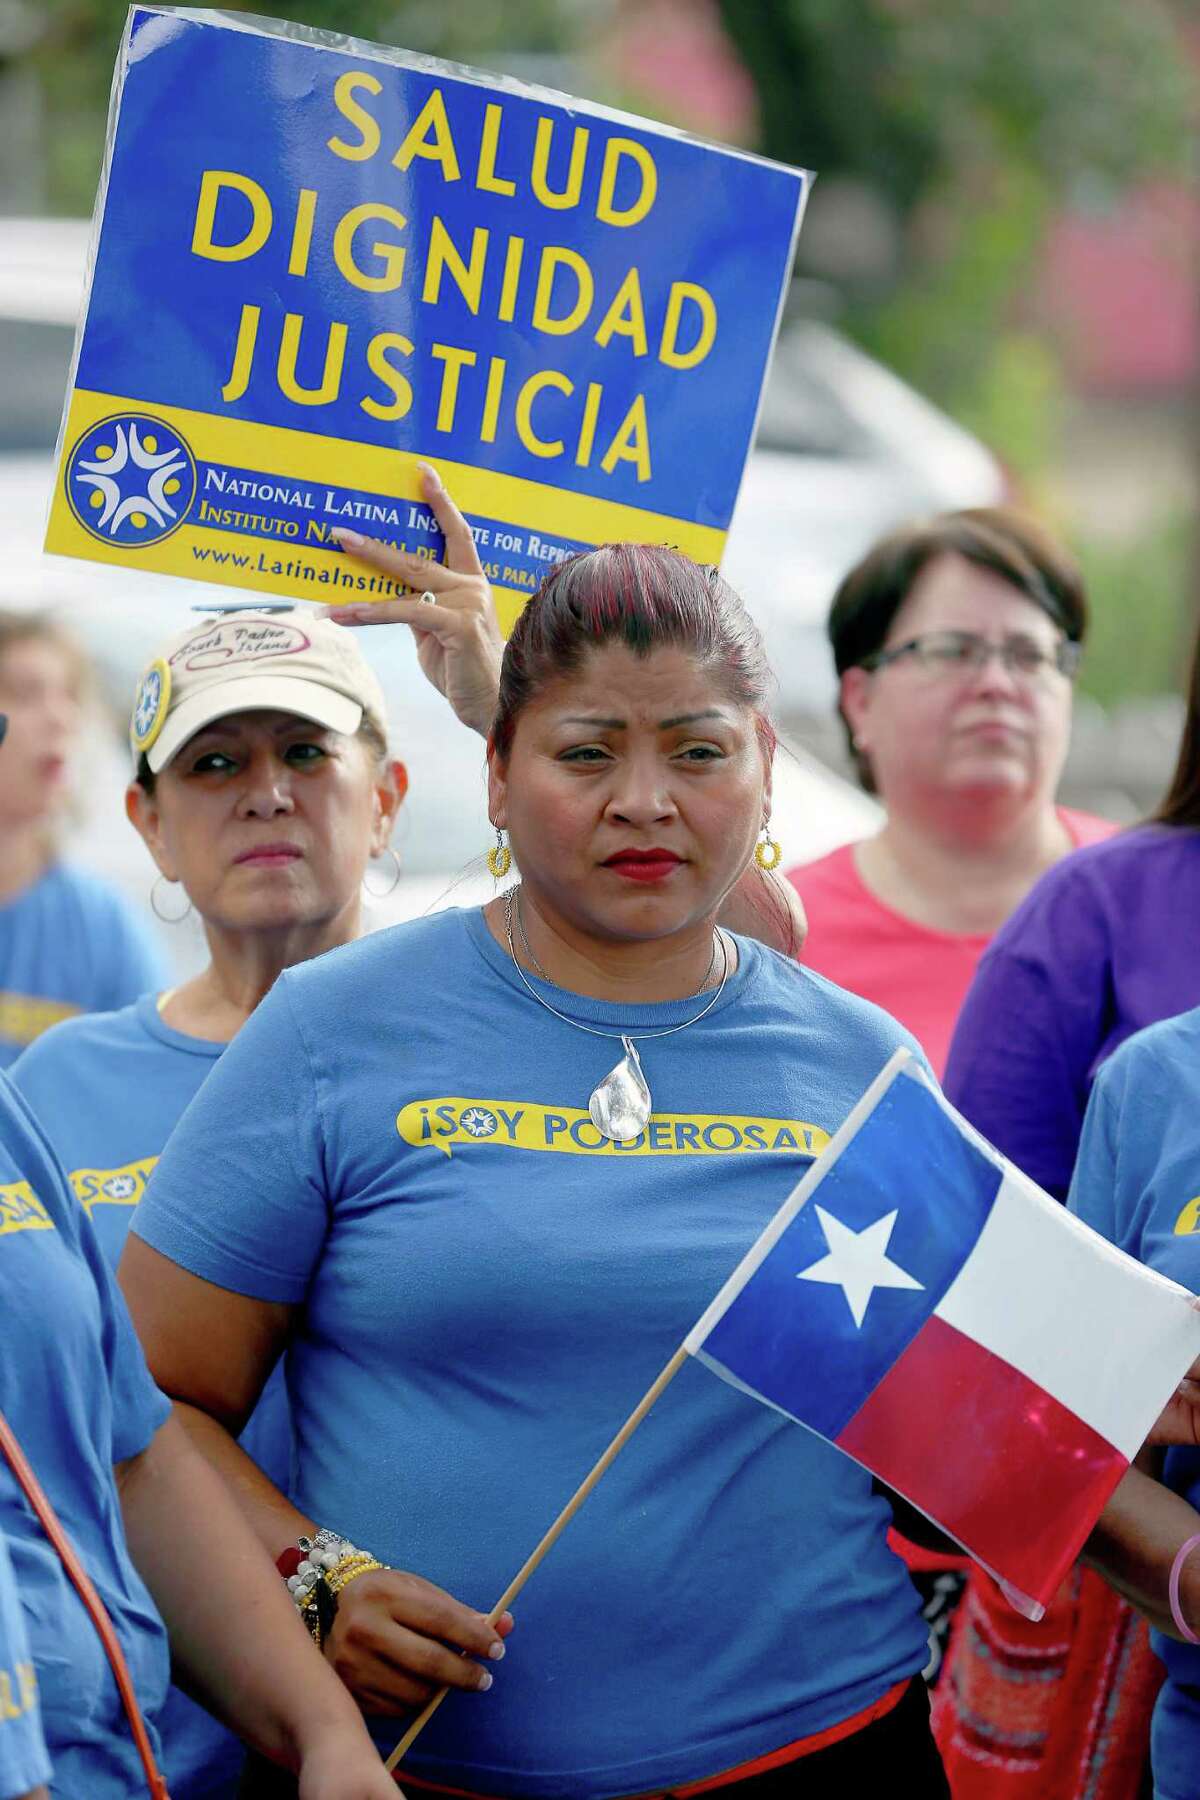 Marta Hernandez, holding Texas flag, listens during a news conference and rally Monday, June 27, 2016 at the Whole Woman's Health of McAllen clinic in McAllen. Members of the community had gathered there to celebrate the Supreme Court's 5-3 ruling that struck down a pair of strict Texas abortion regulations, sparing nearly a dozen clinics in the state from imminent closure.